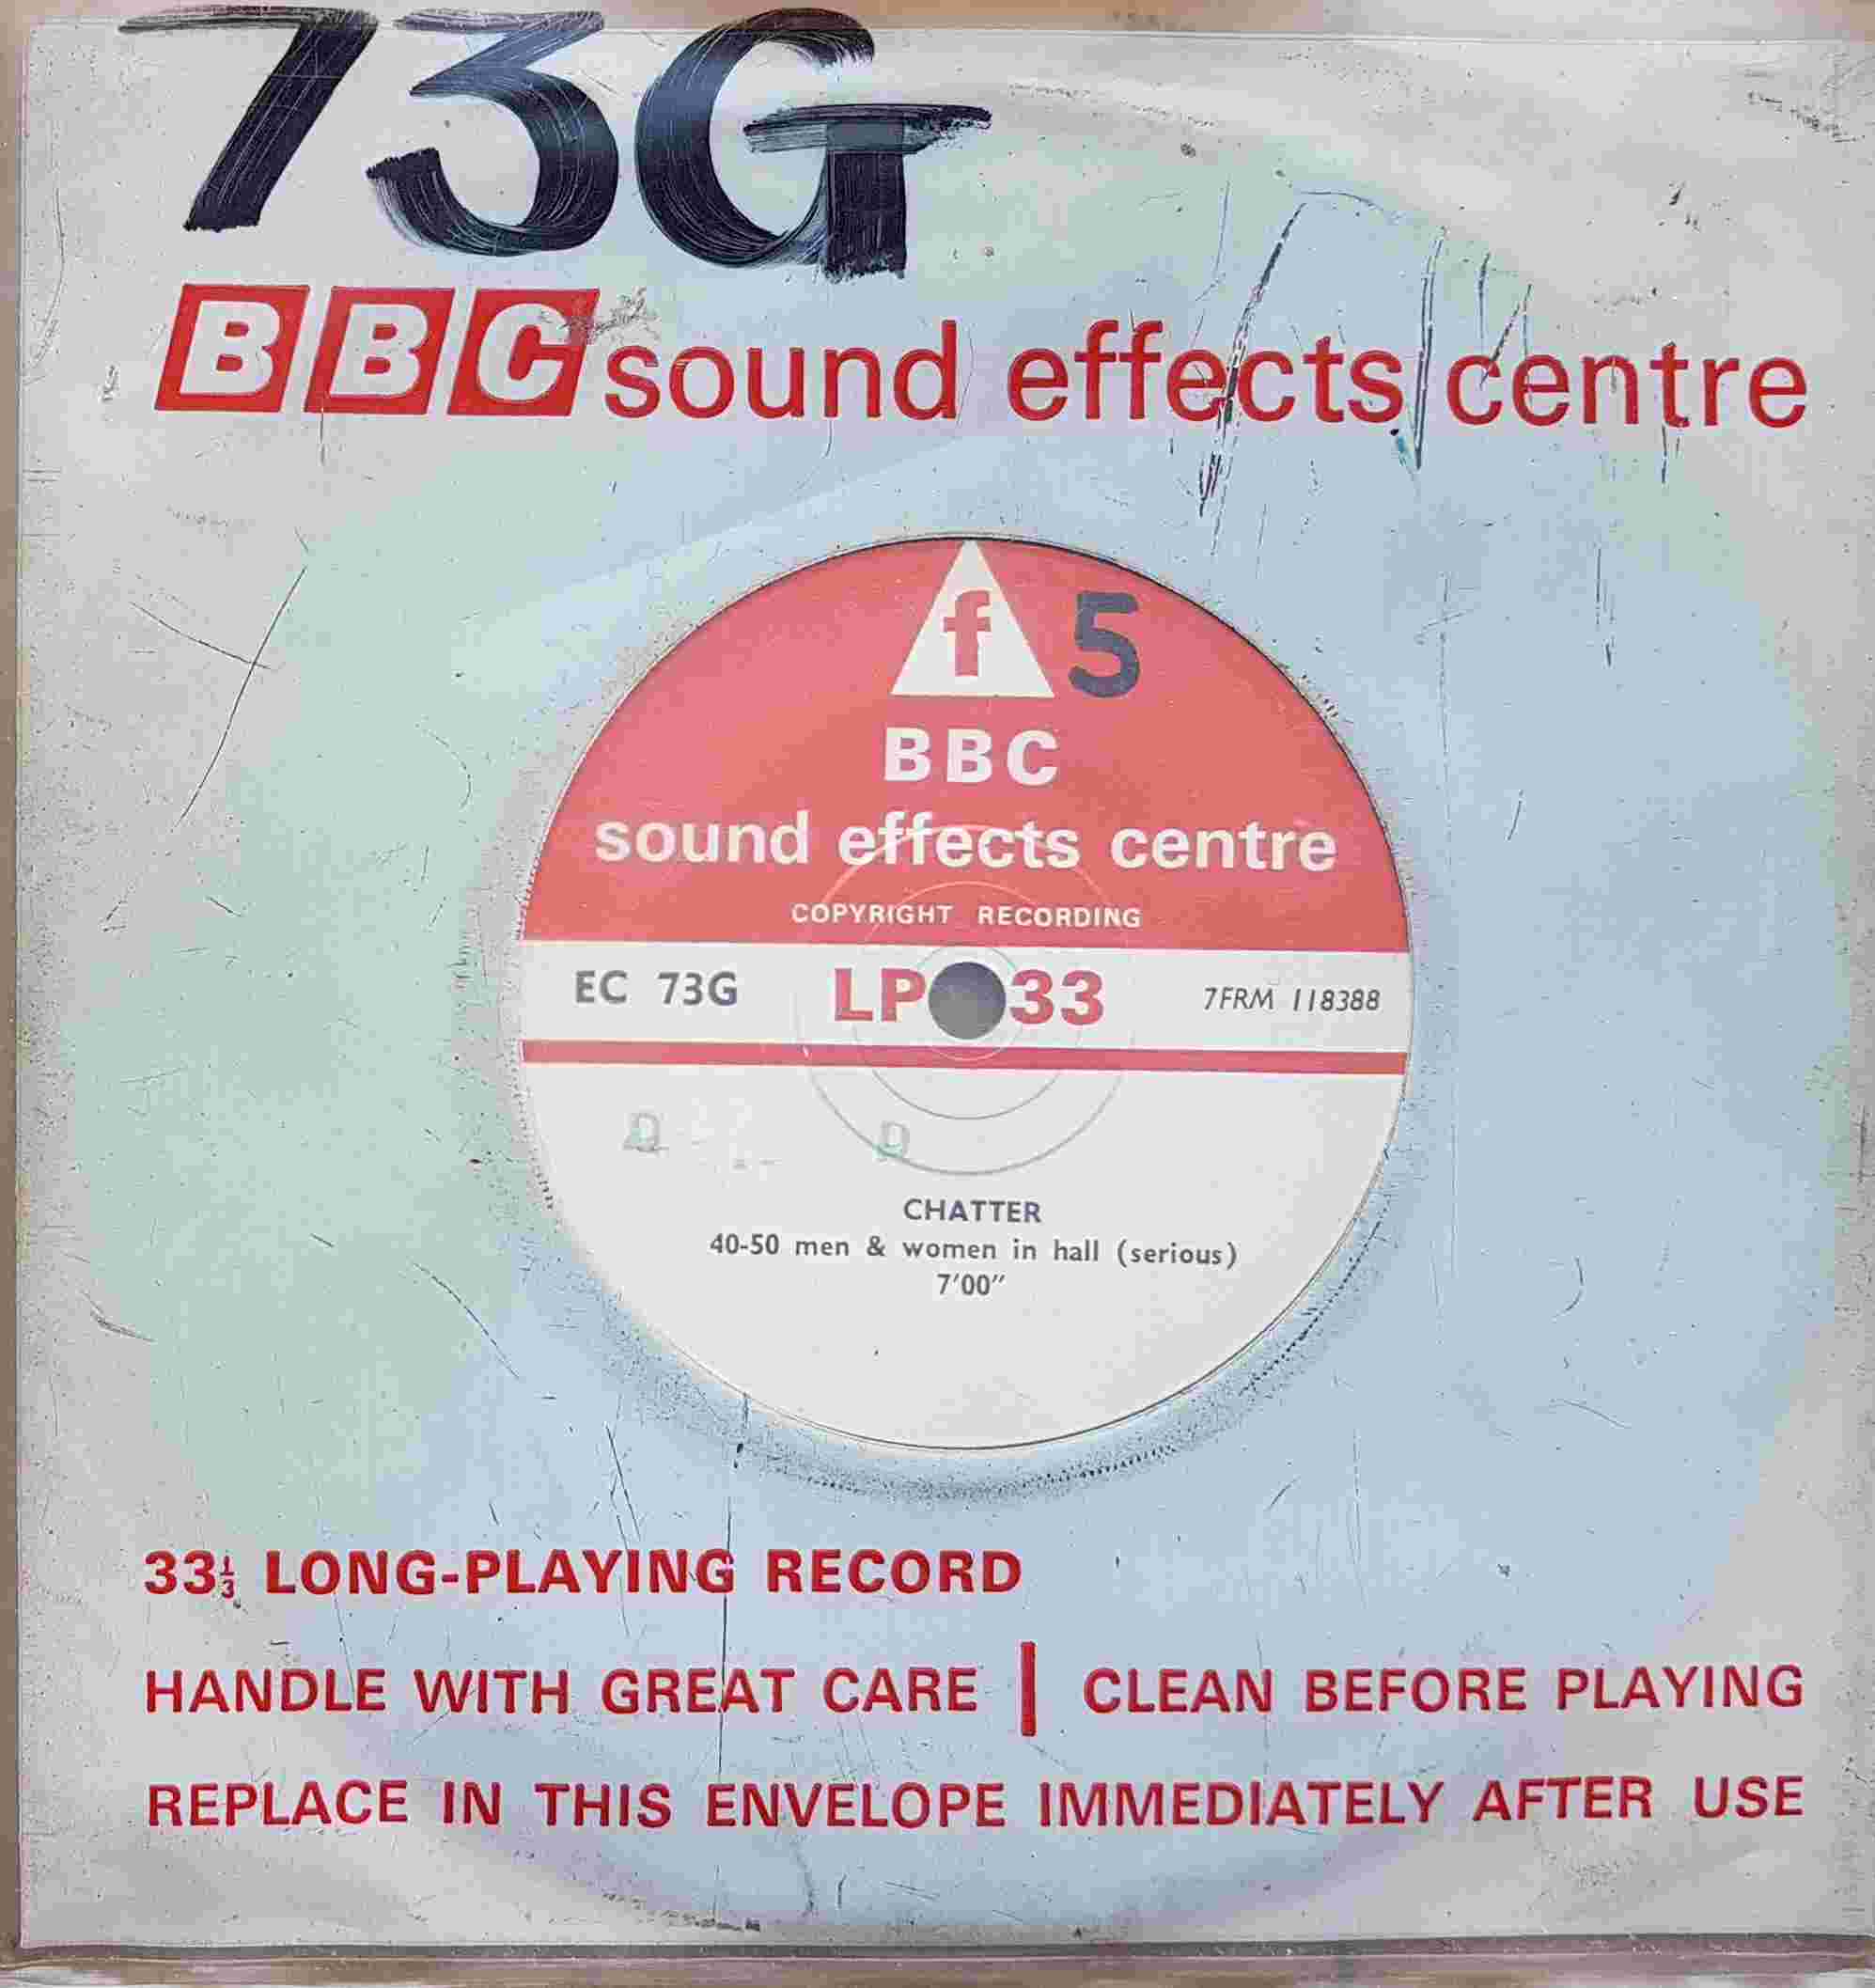 Picture of EC 73G Chatter by artist Not registered from the BBC singles - Records and Tapes library